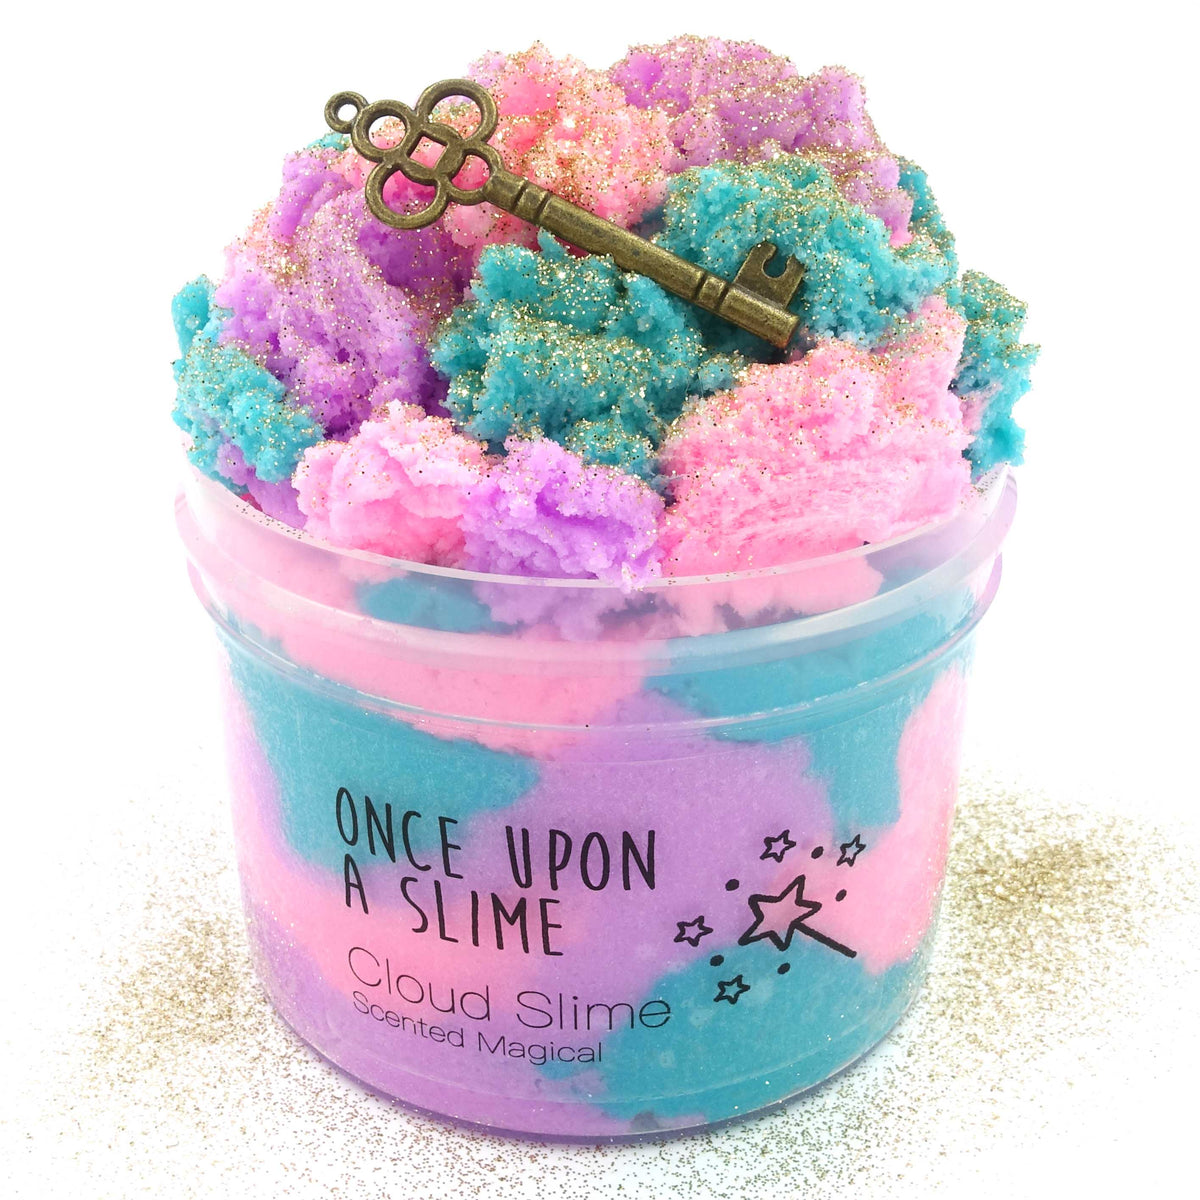 Once Upon a Slime Rainbow Cloud Slime 8oz Front View